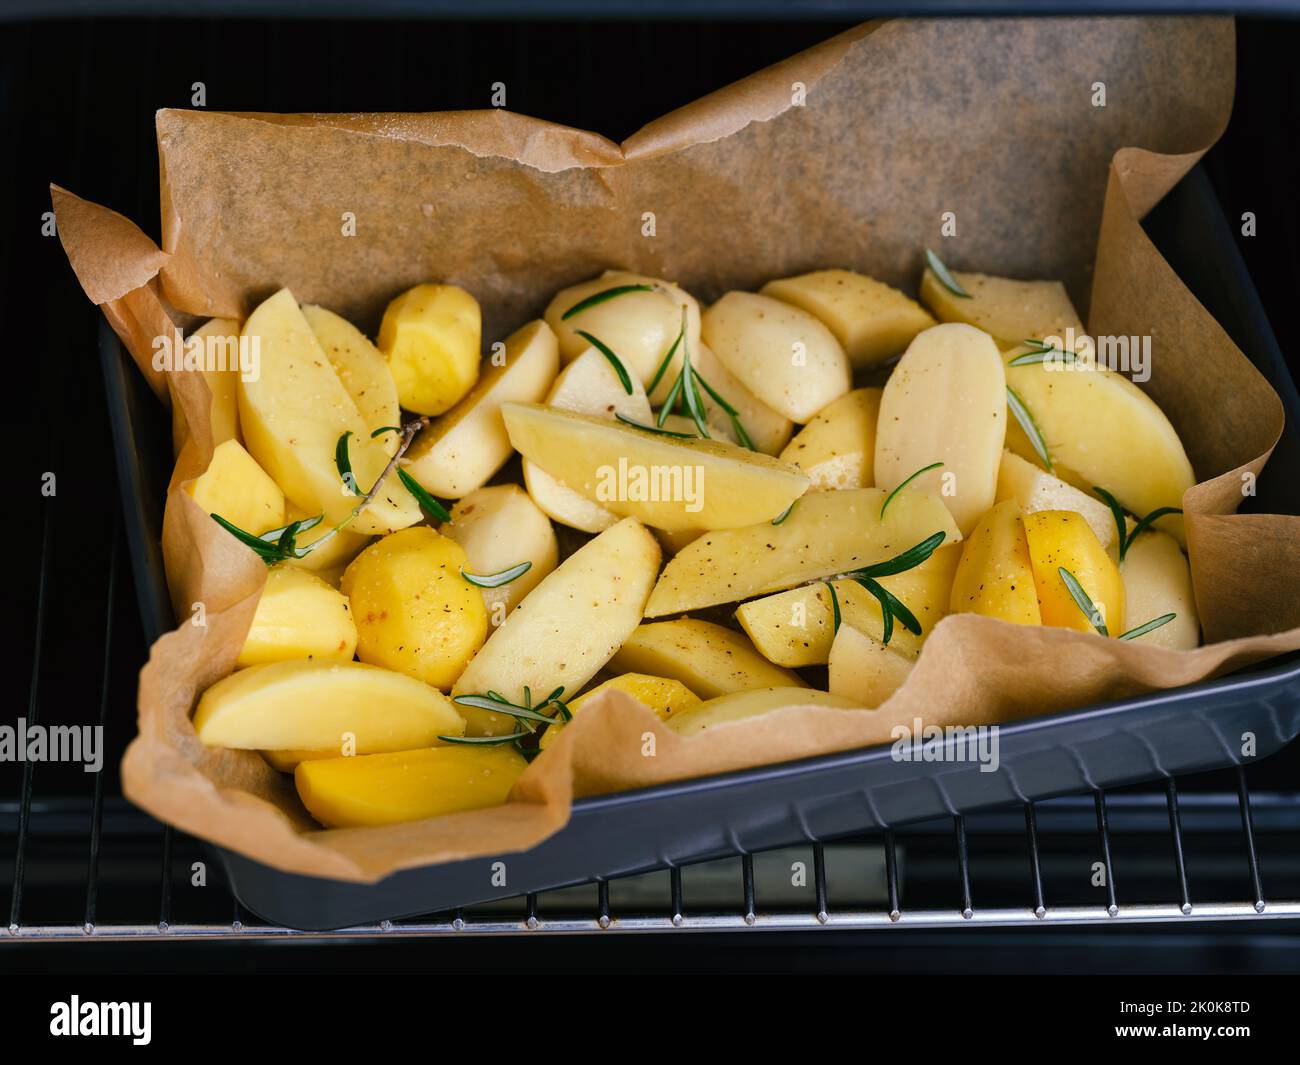 Raw potatoes with rosemary and spices in a black baking tray ready to baked in an oven. Stock Photo